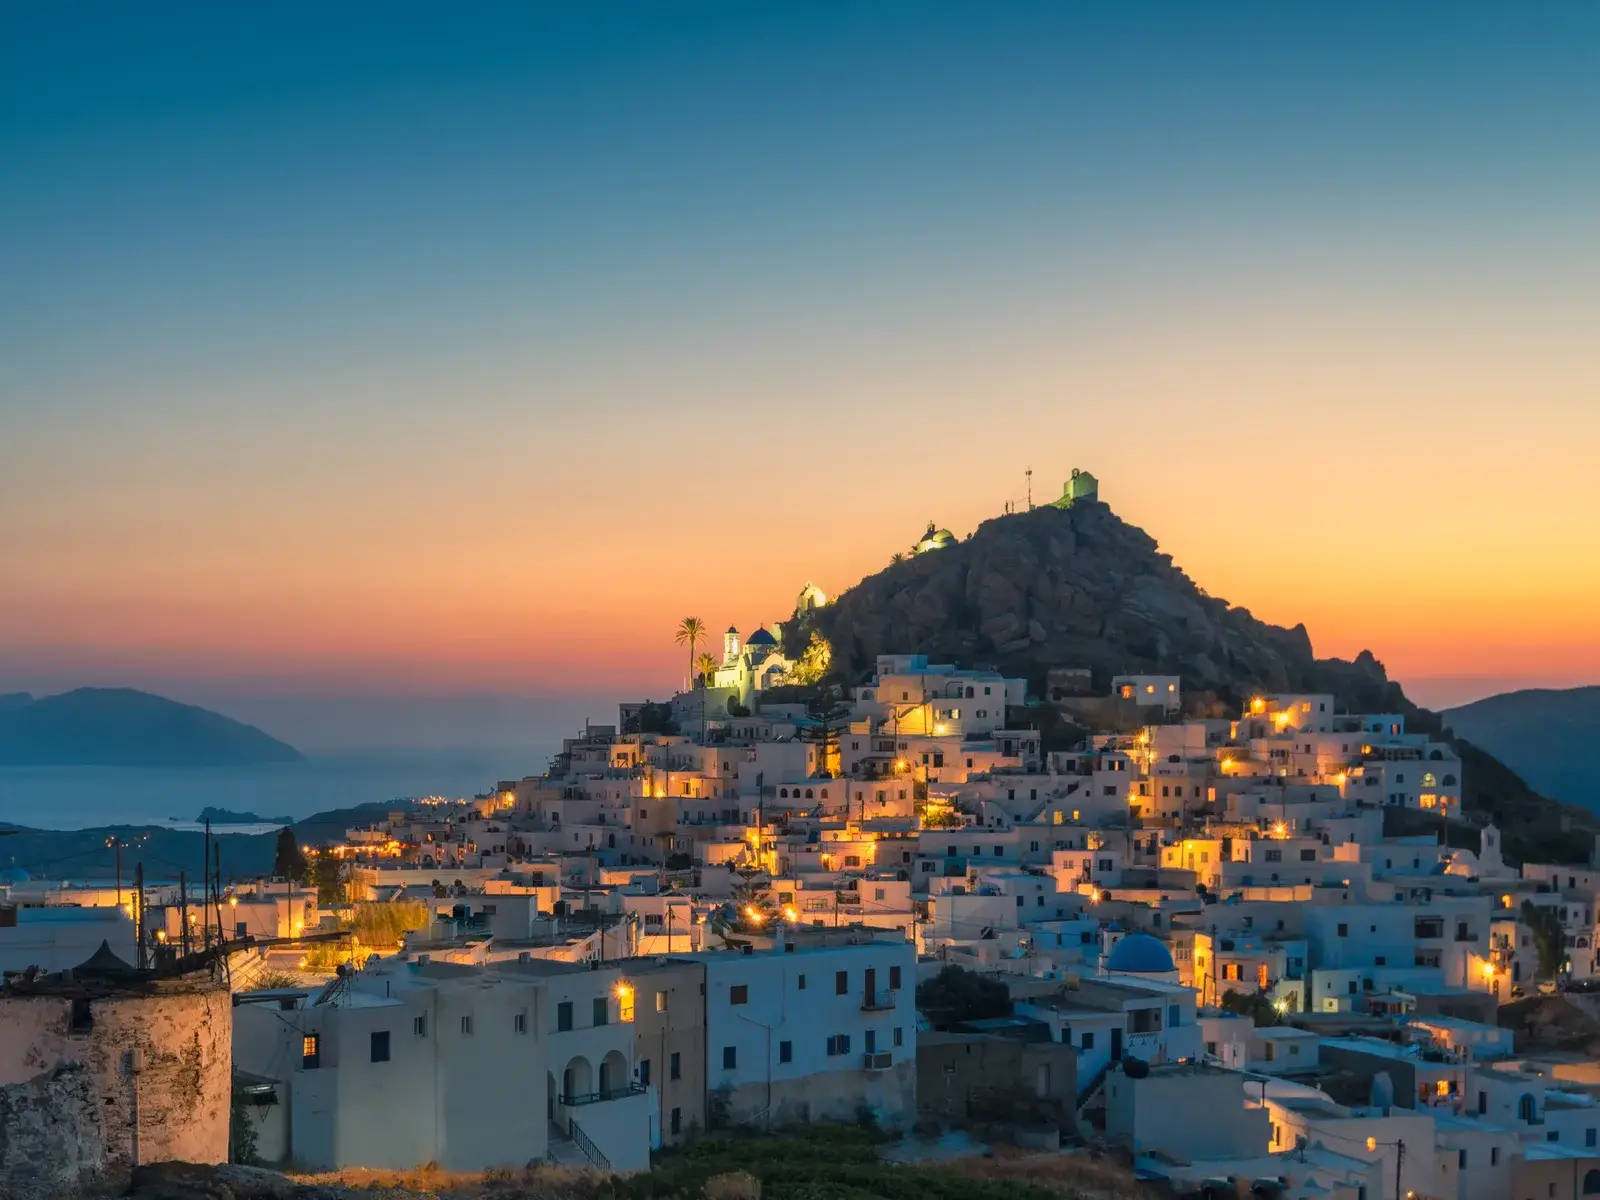 The lovey Chora Village at dusk in Ios island, one of the best islands in Greece to visit